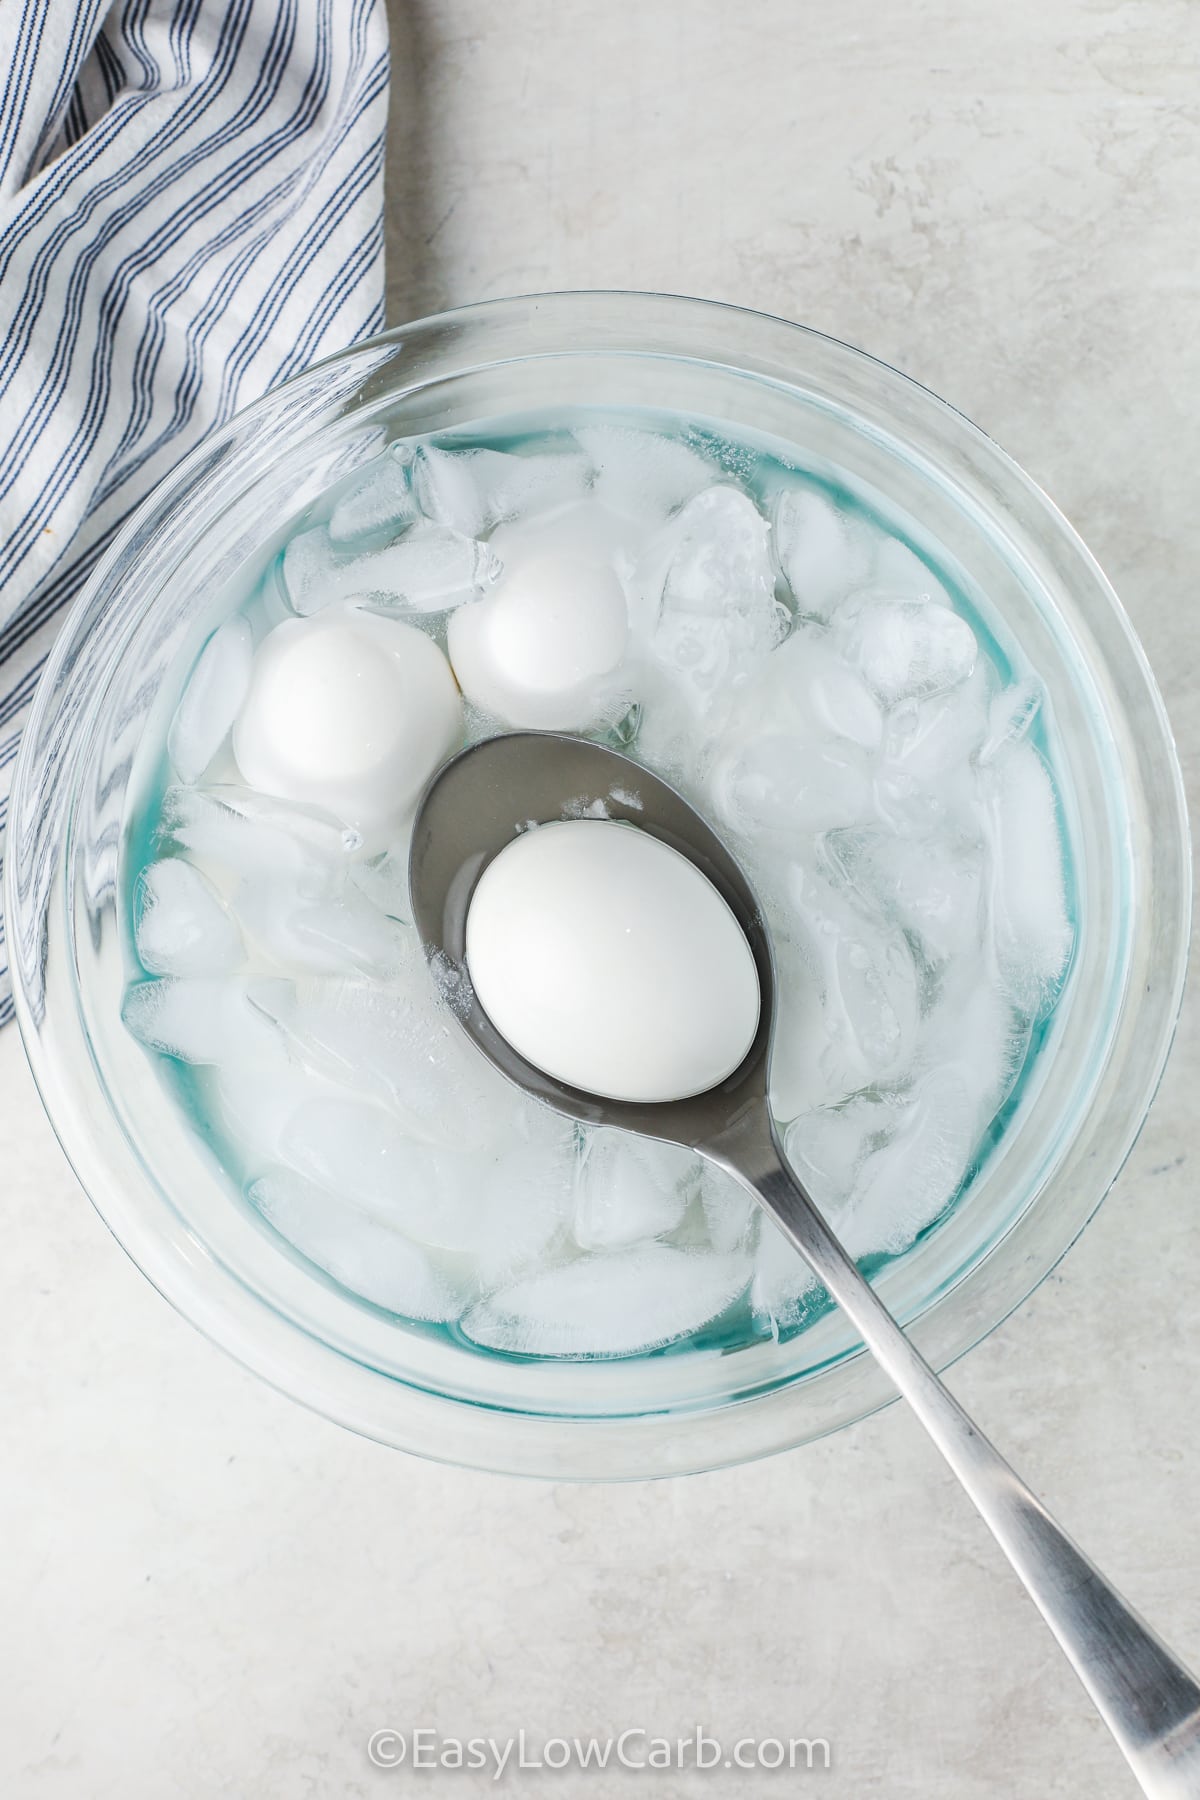 taking an egg out of ice water to make Easy Hard Boiled Eggs